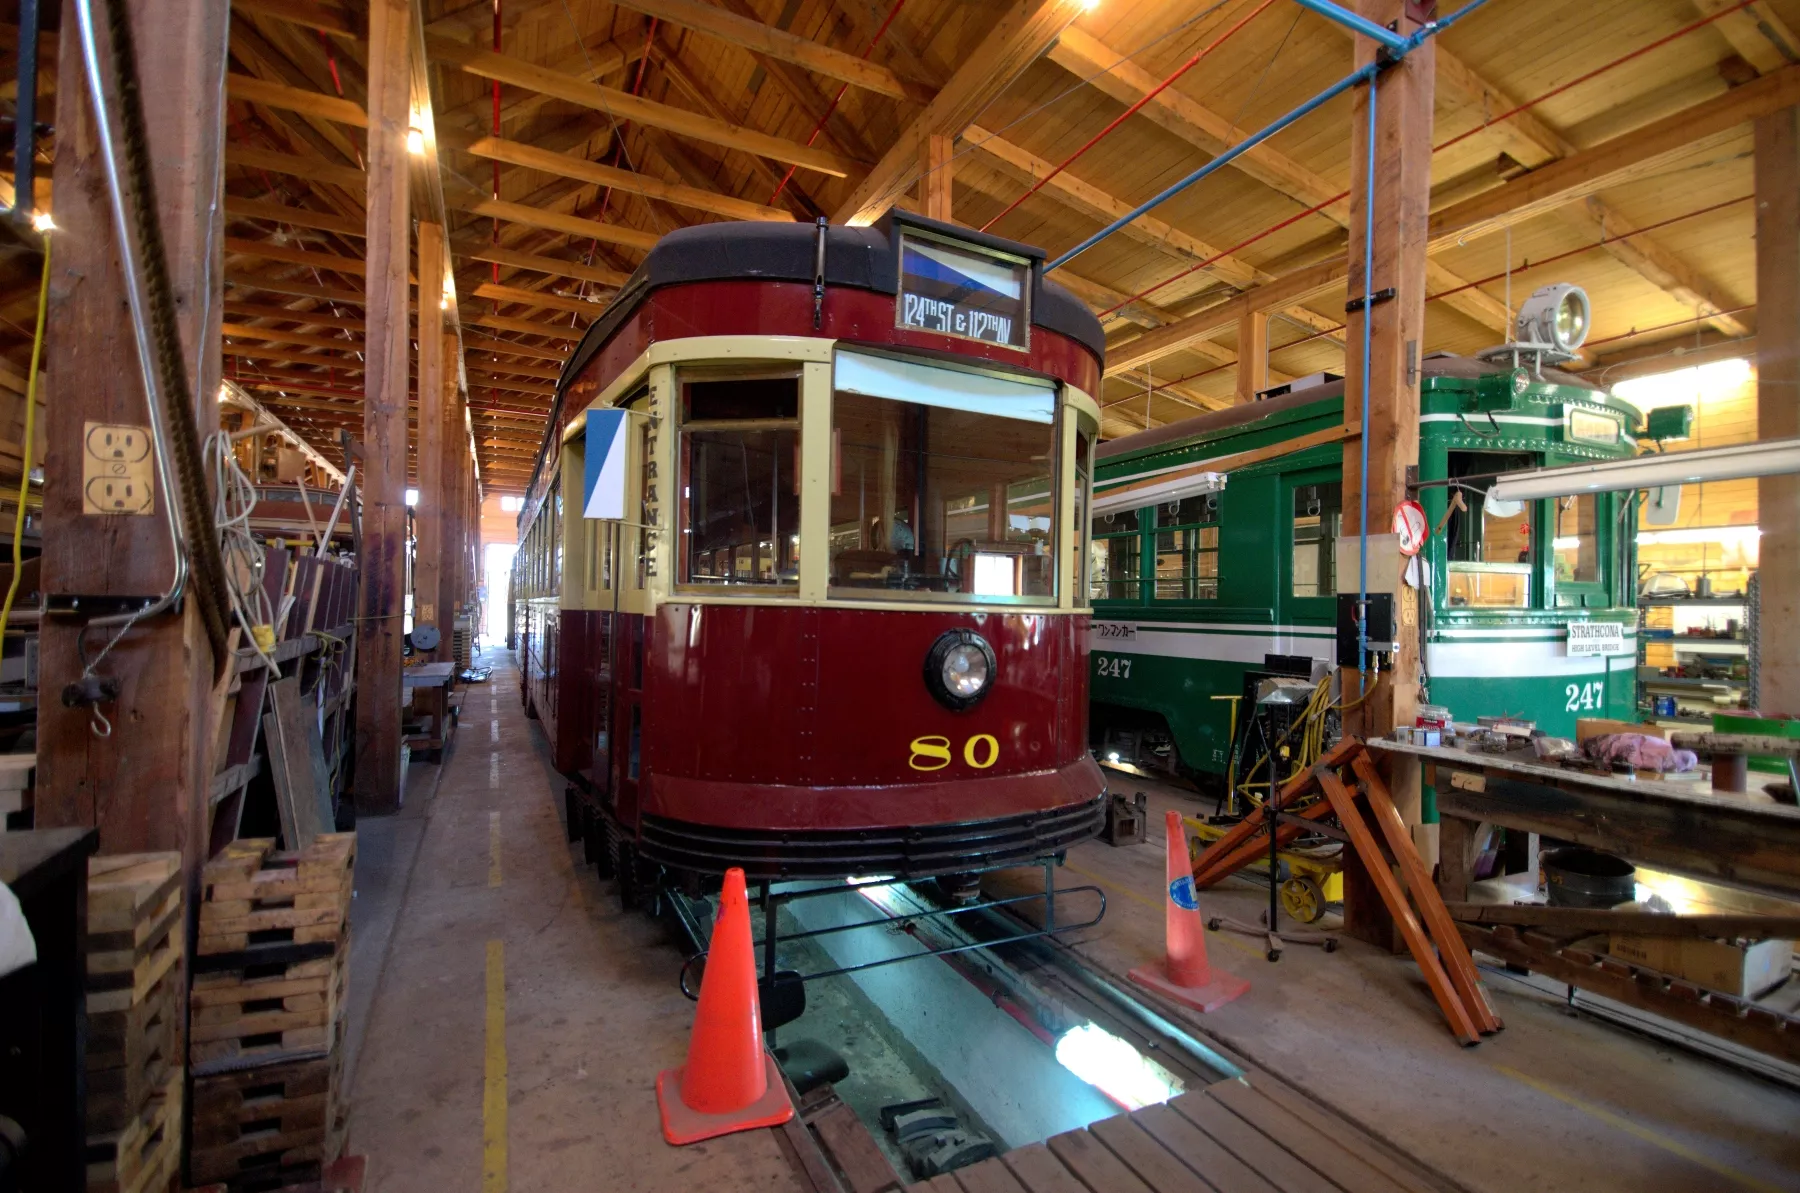 Edmonton Radial Railway Society in Canada, North America | Scenic Trains - Rated 3.9